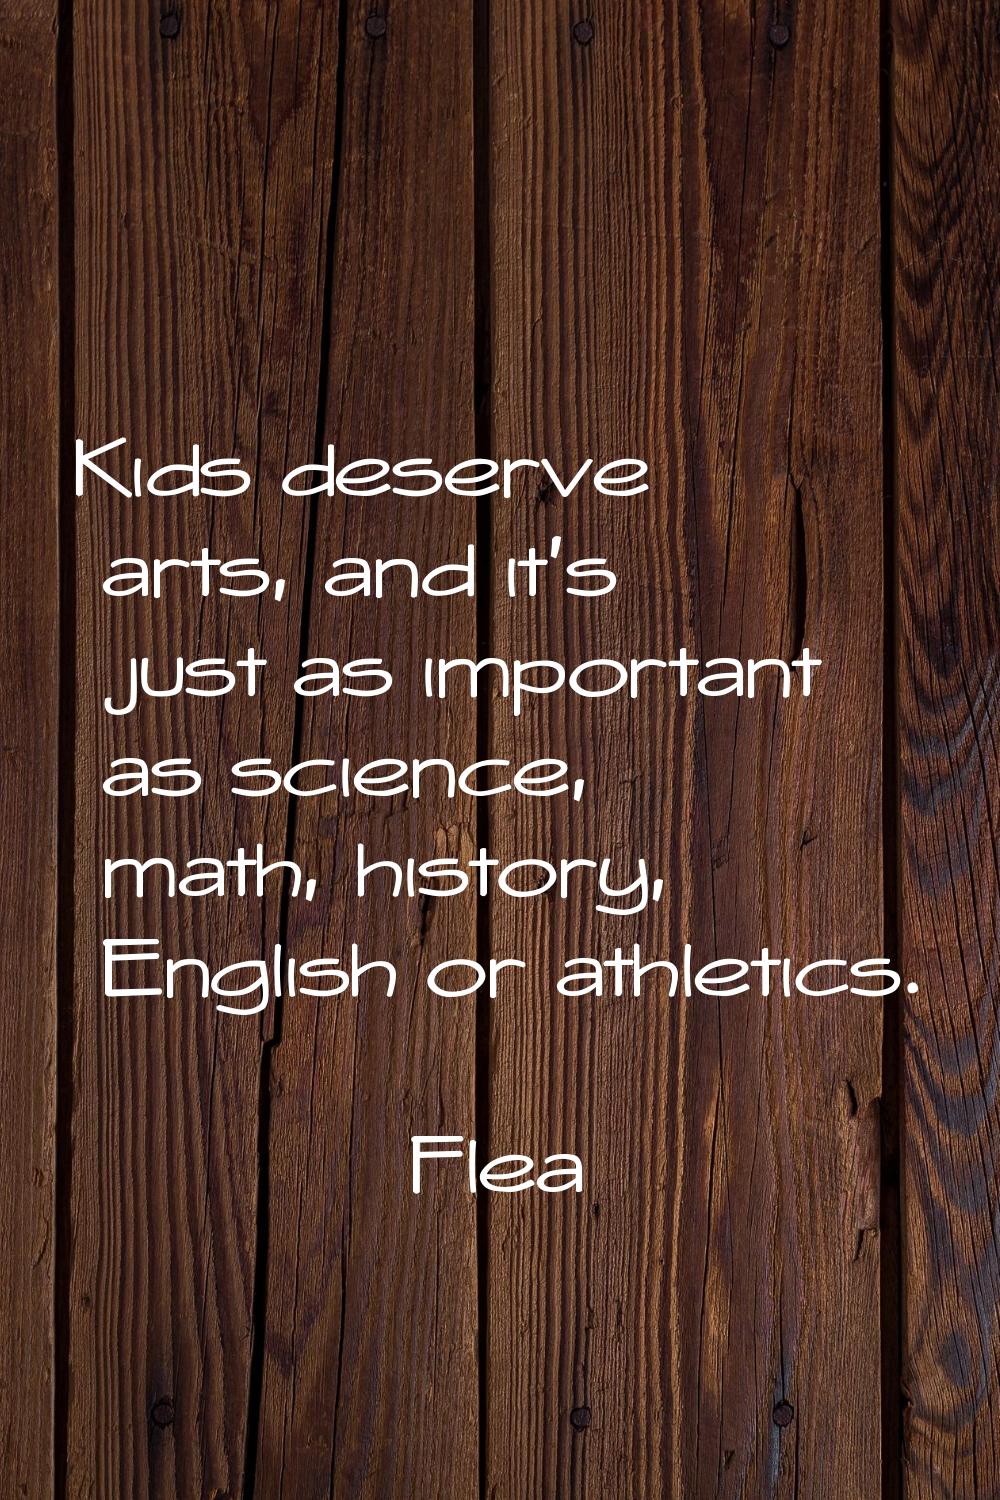 Kids deserve arts, and it's just as important as science, math, history, English or athletics.